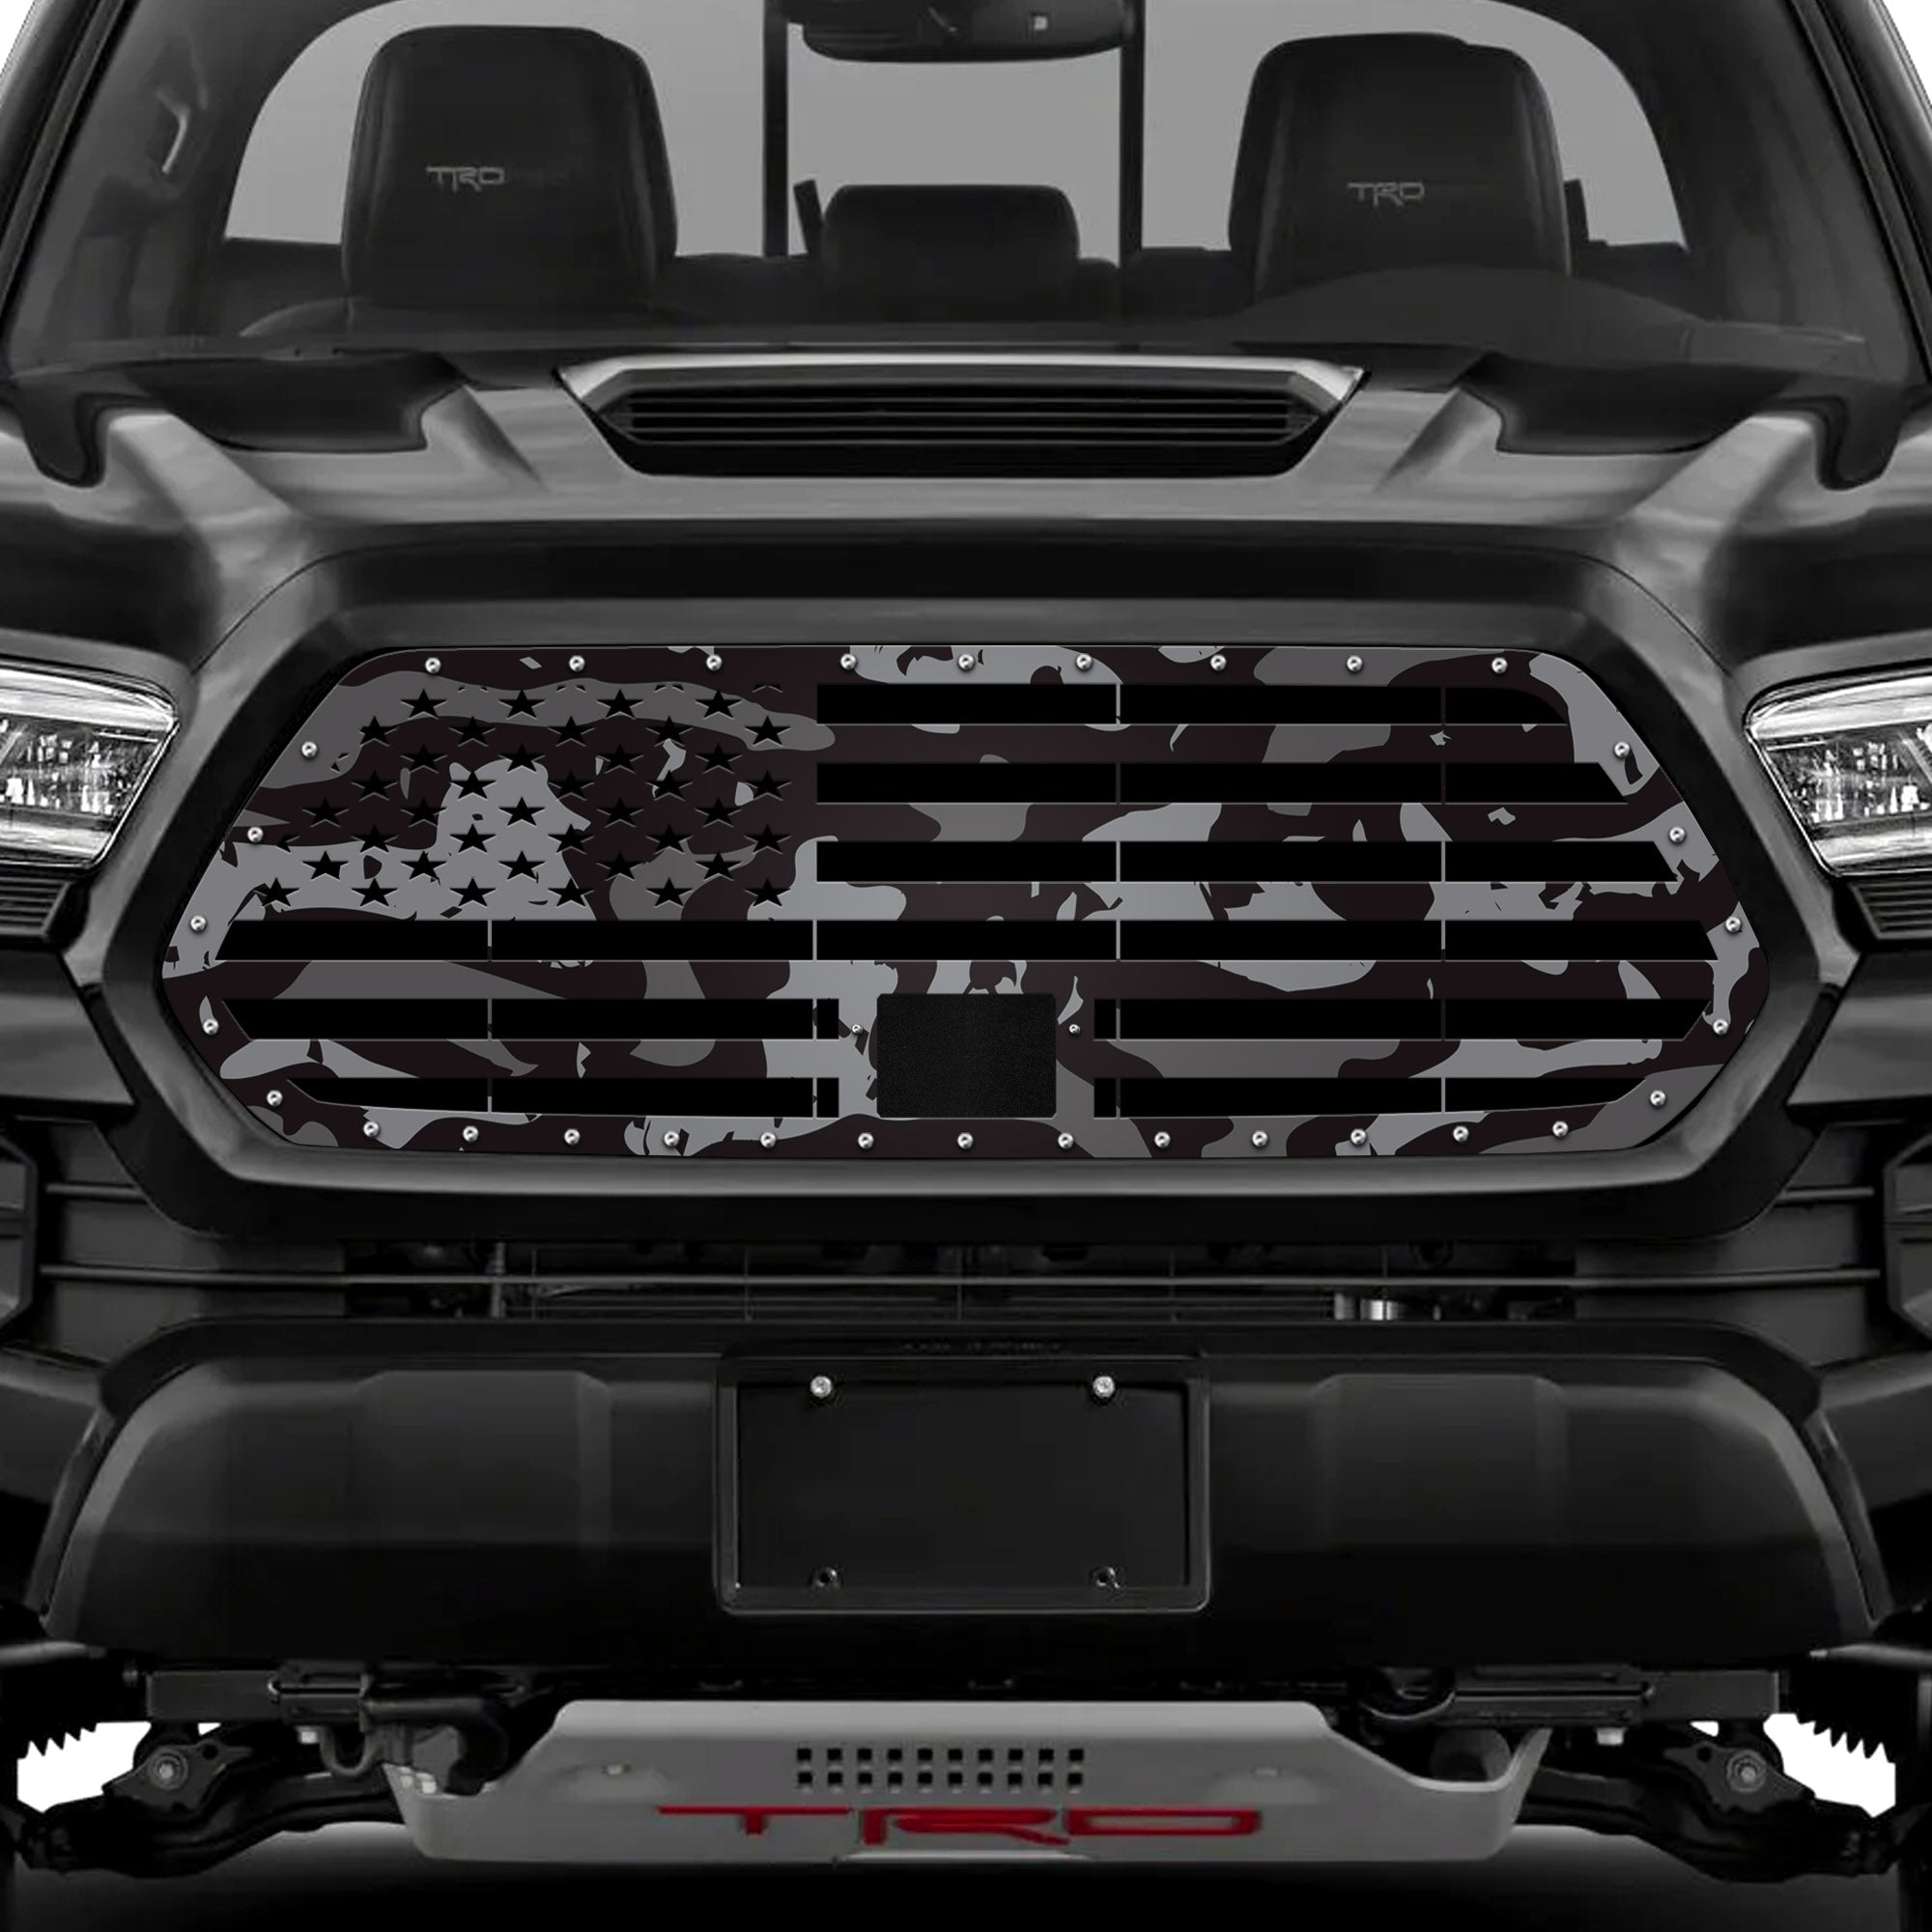 Tacoma, Toyota, Grilles, Truck Grilles, Truck, Grille, Grill, 300 Industries, Powder Coat, Aftermarket Accessories